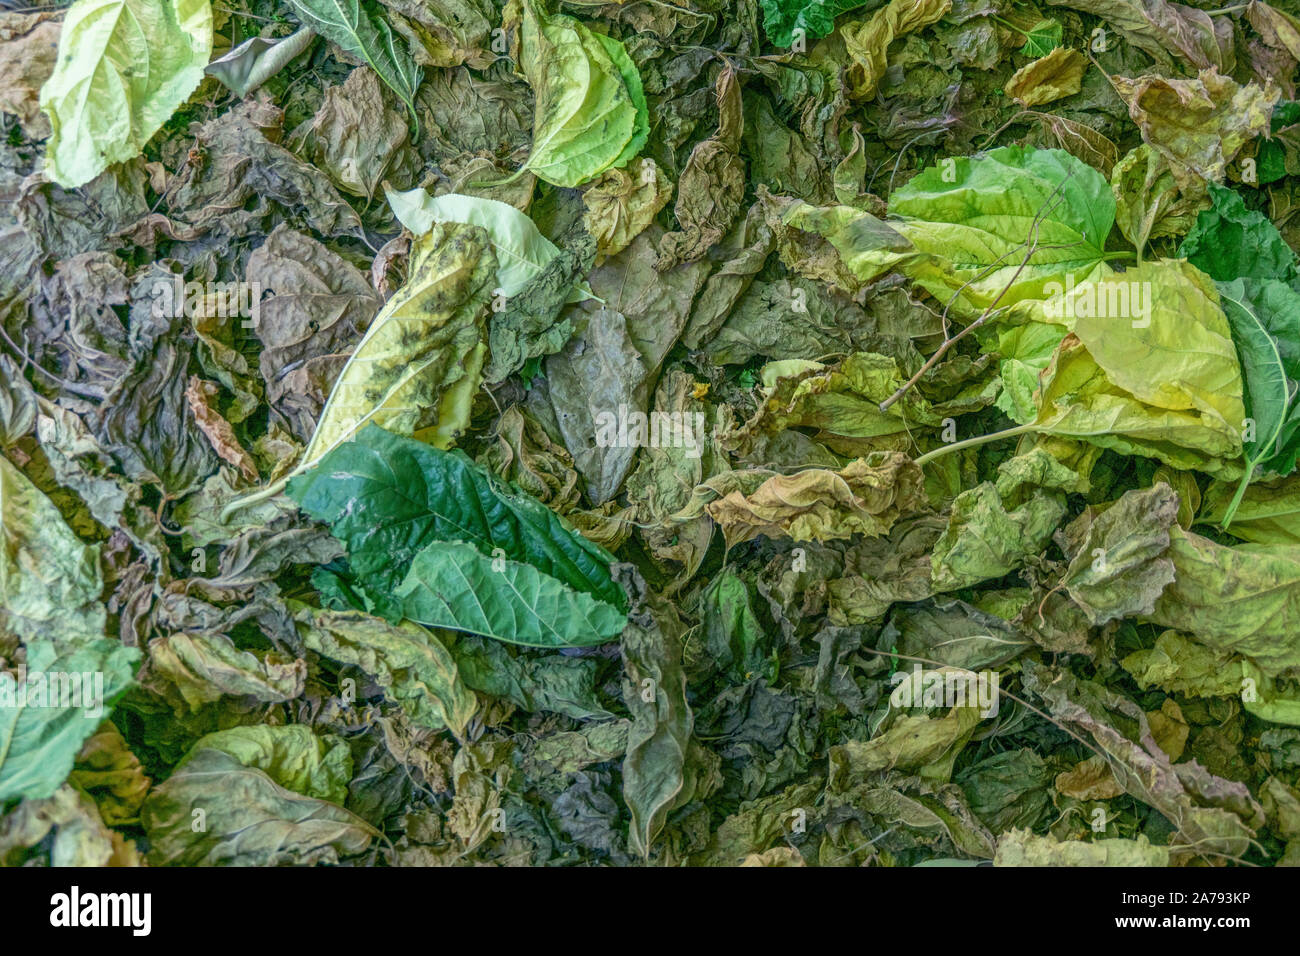 Leaf litter which has been photographed from above to show a pattern suitable for a background Stock Photo